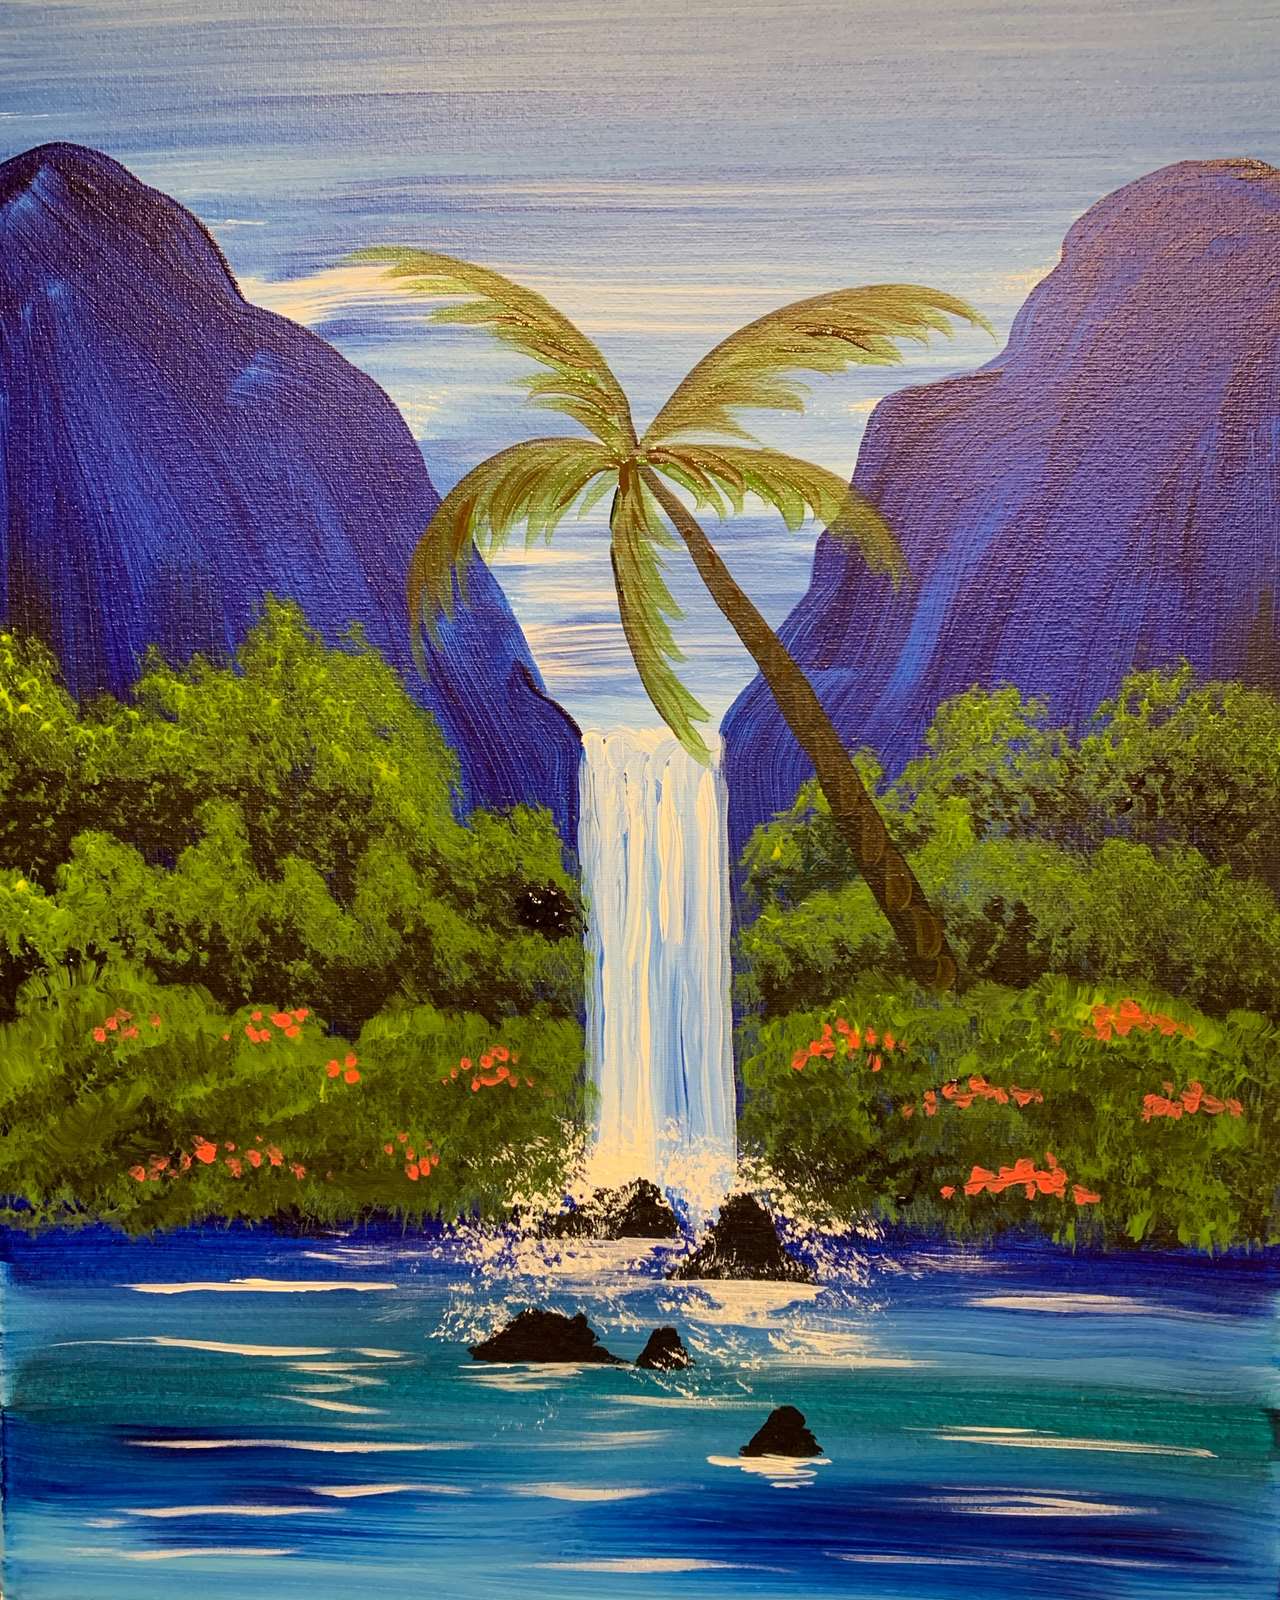 Waterfall in Paradise - Thu, Aug 08 7PM at Town Square